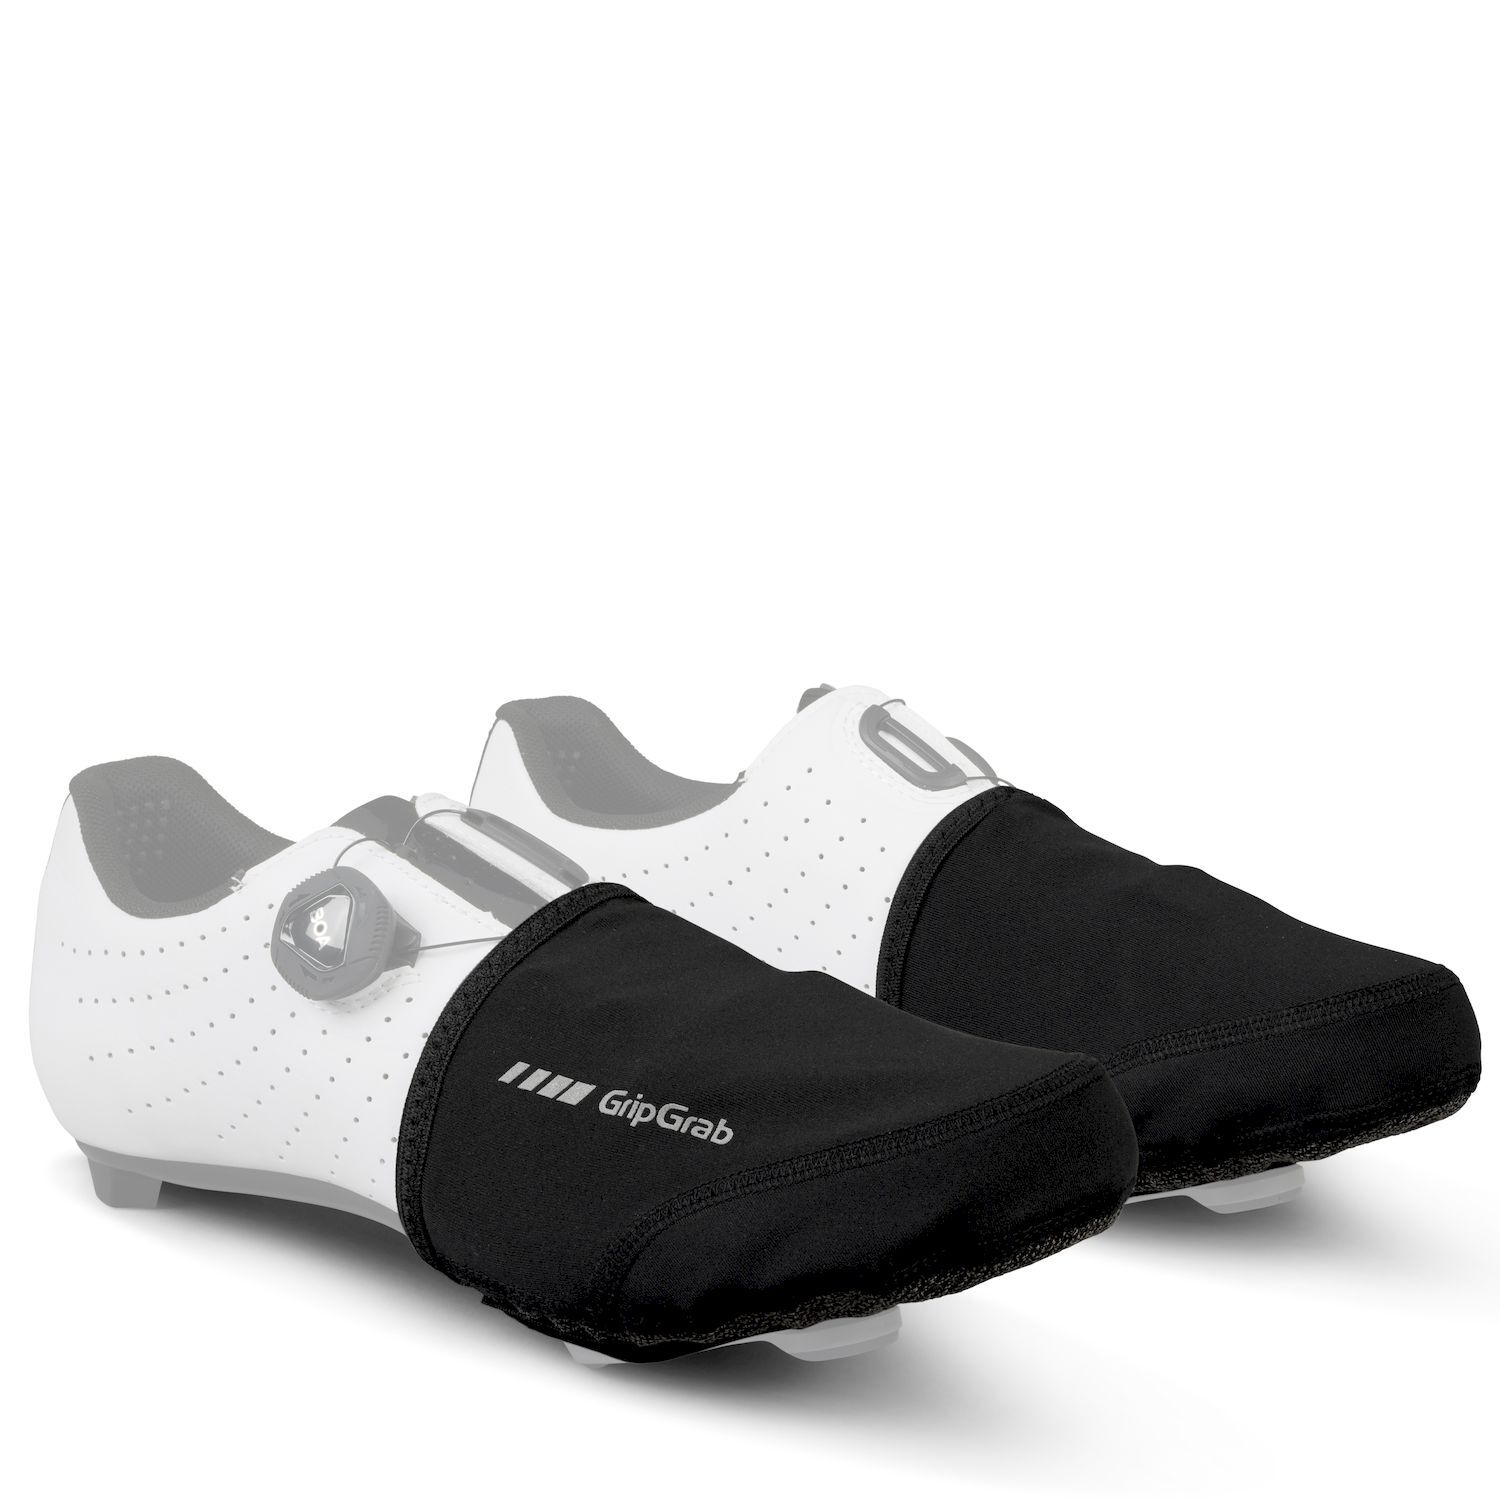 GripGrab Windproof Toe Covers - Cycling overshoes